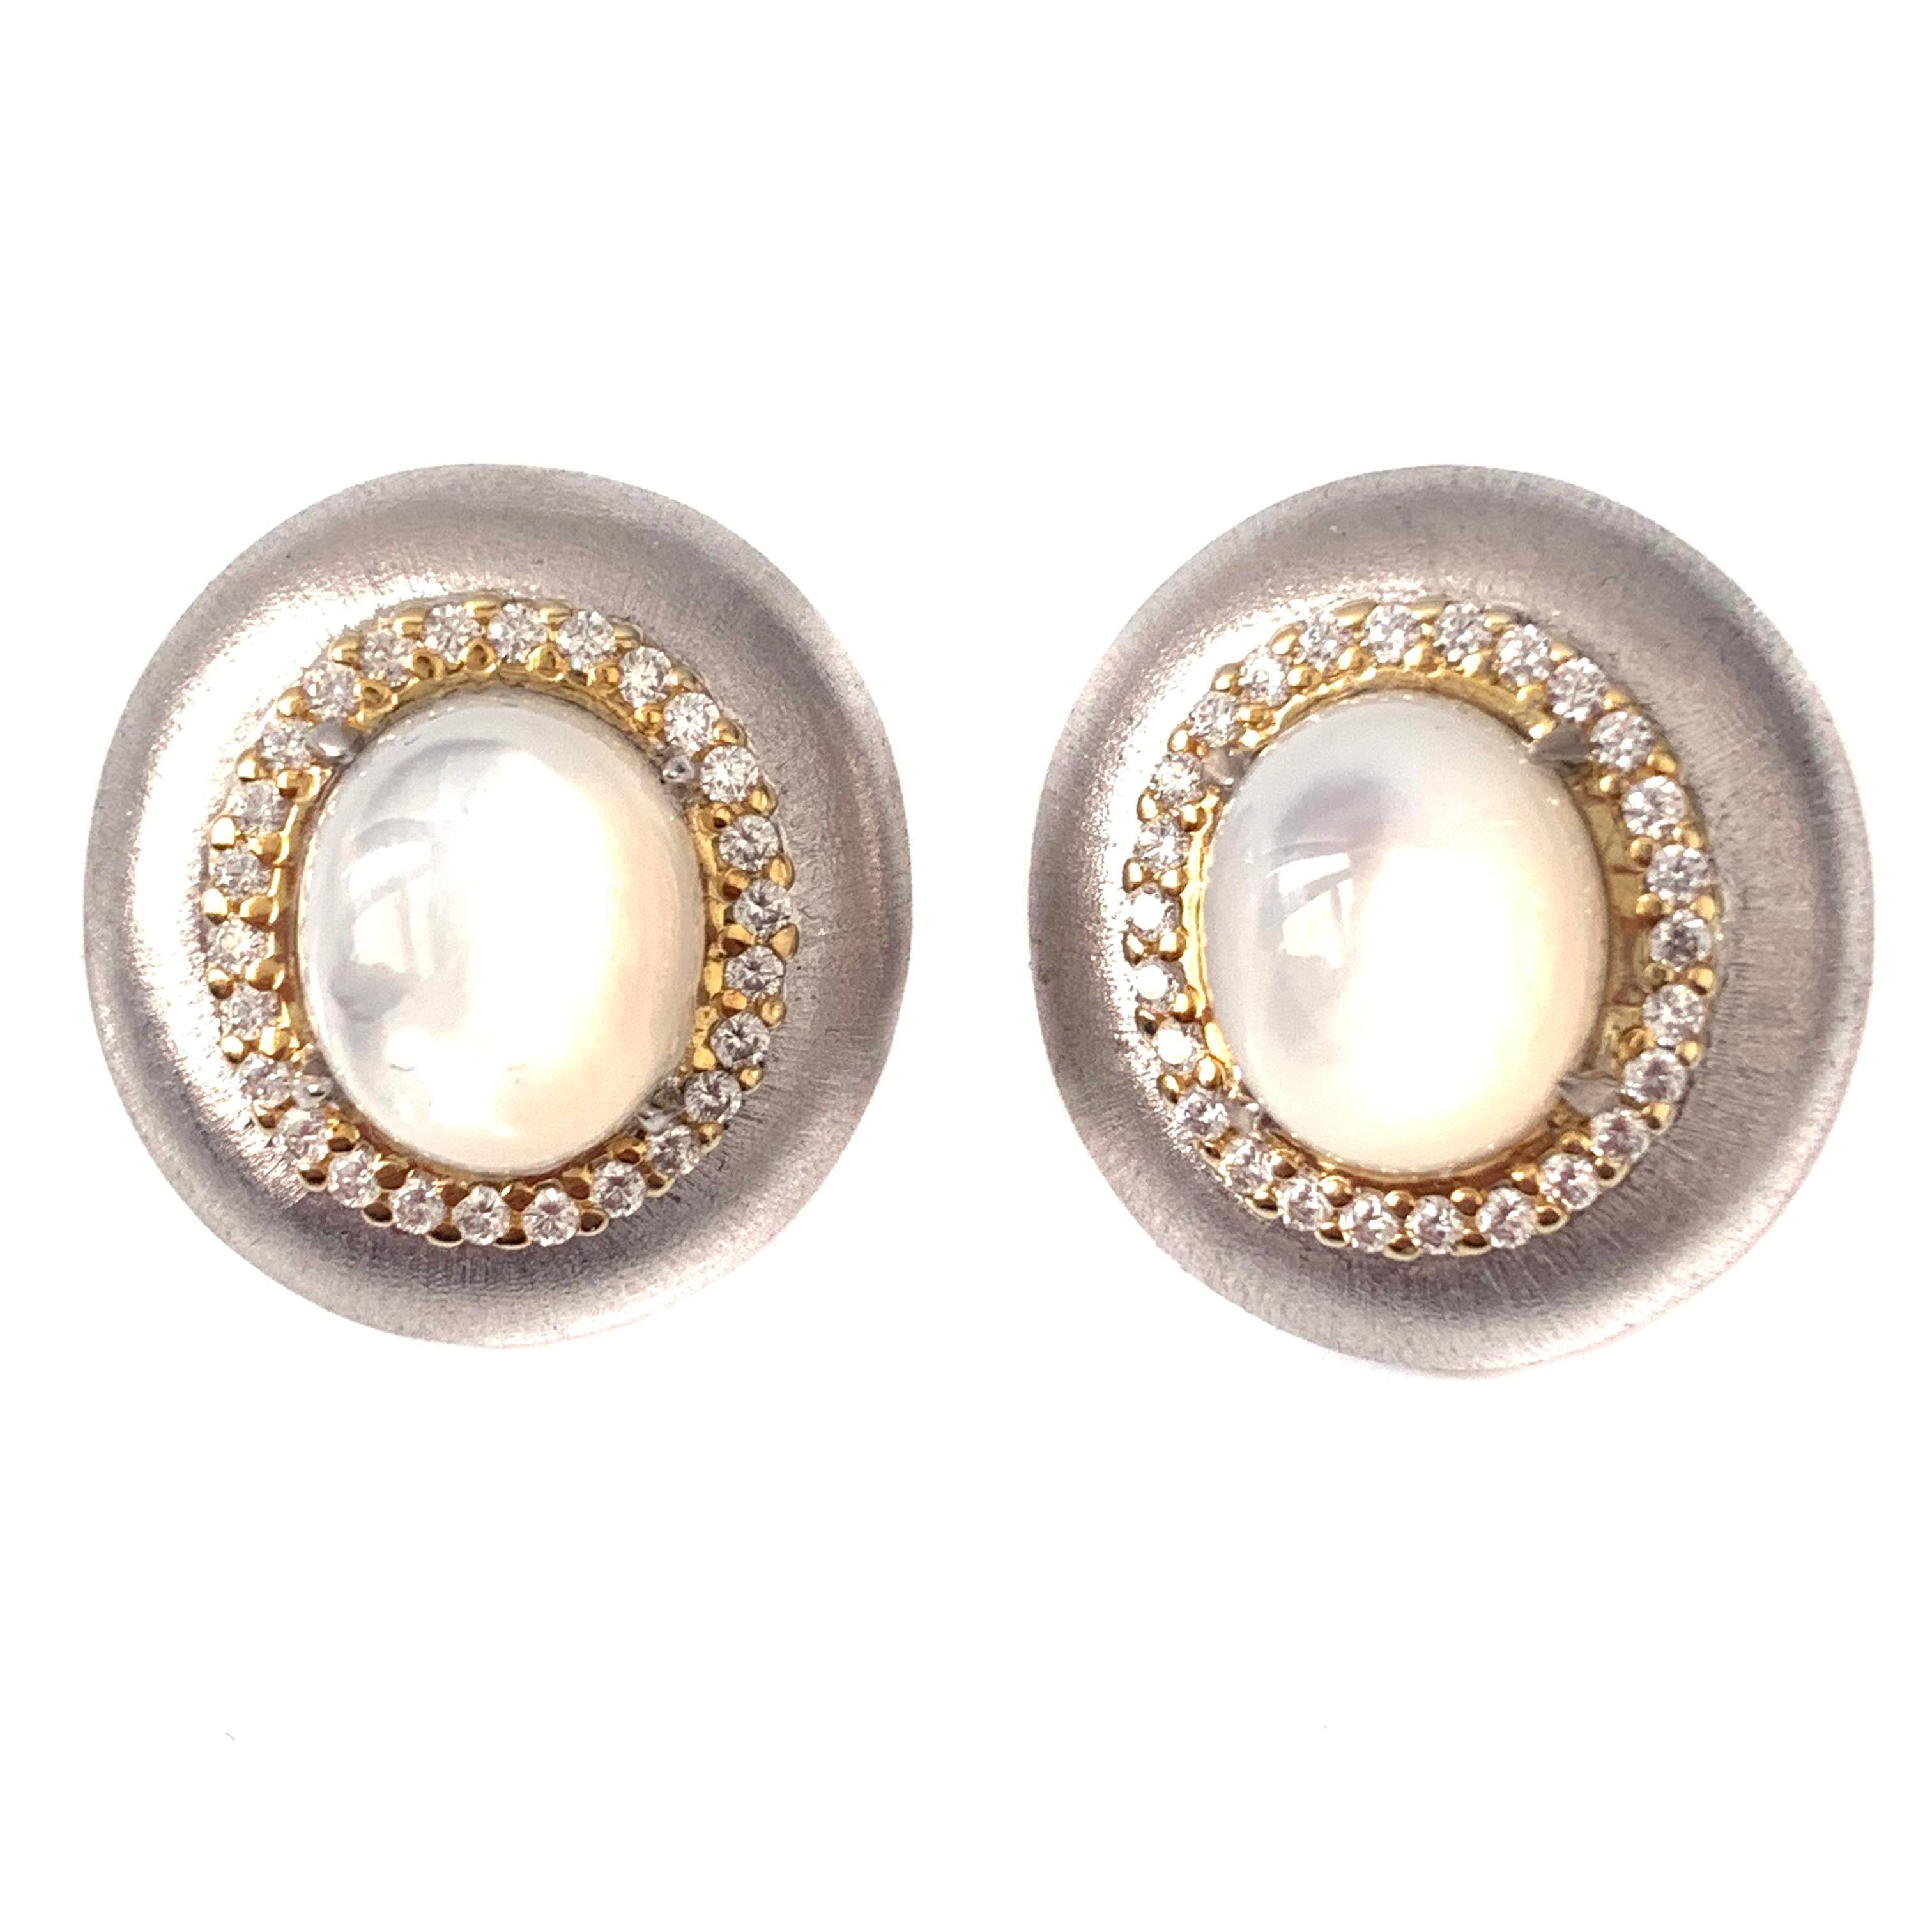 Two-tone Sterling Silver Oval Mother of Pearl Oval Button Clip-on Earrings

The earrings features lustrous oval cabochon cut mother of pearl and round faux diamond cz, handset in two-tone platinum rhodium & 18k gold plated sterling silver, and